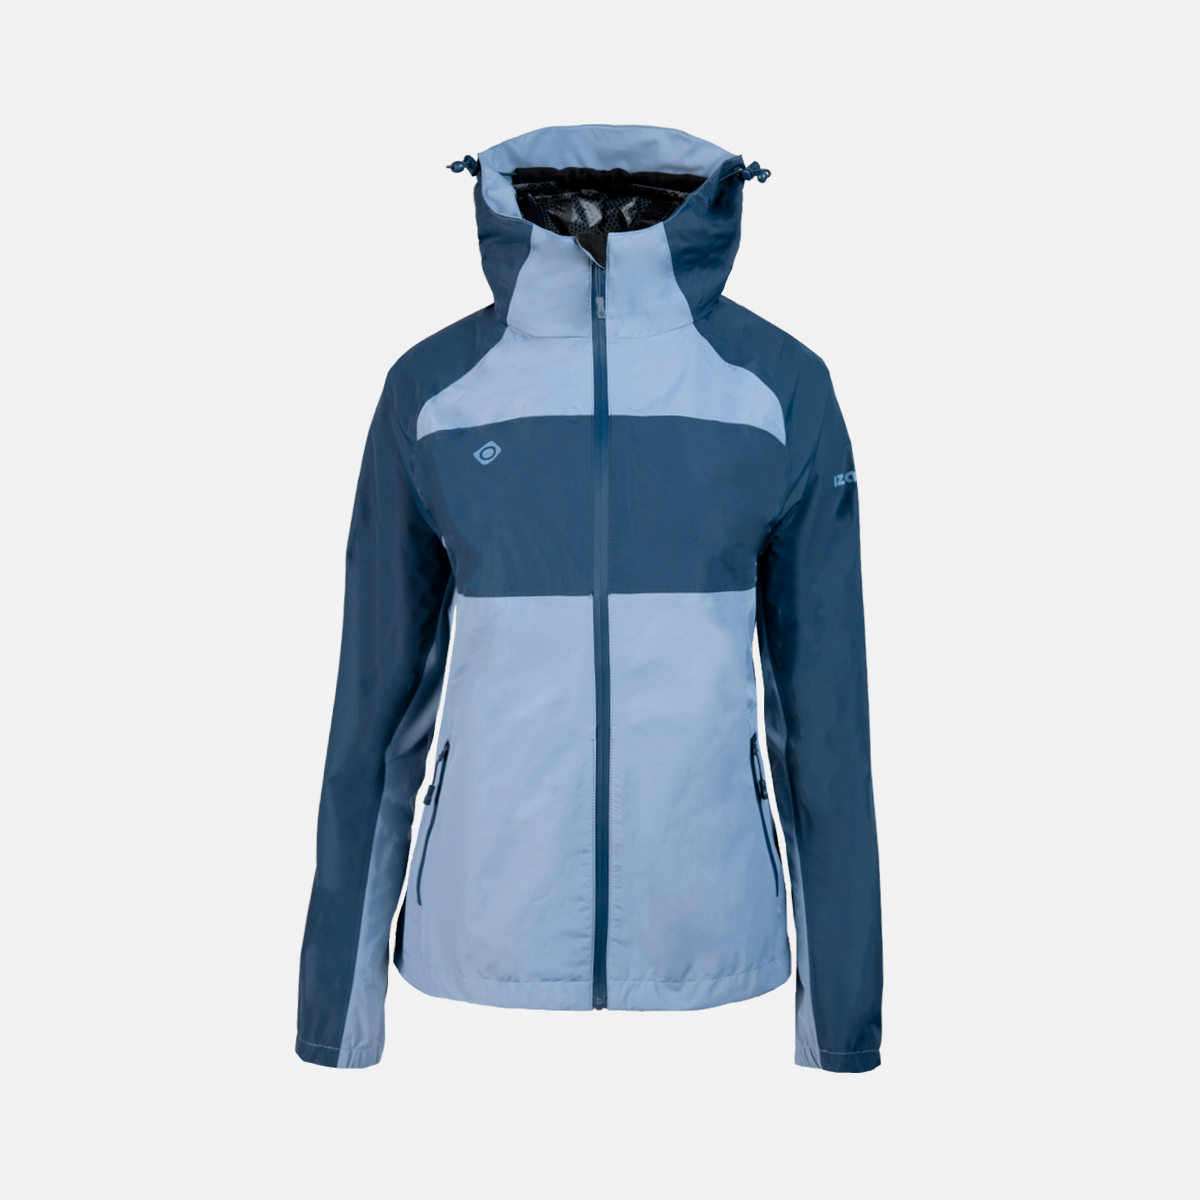  CHAQUETA TÉCNICA IMPERMEABLE AZUL MUJER PONS W